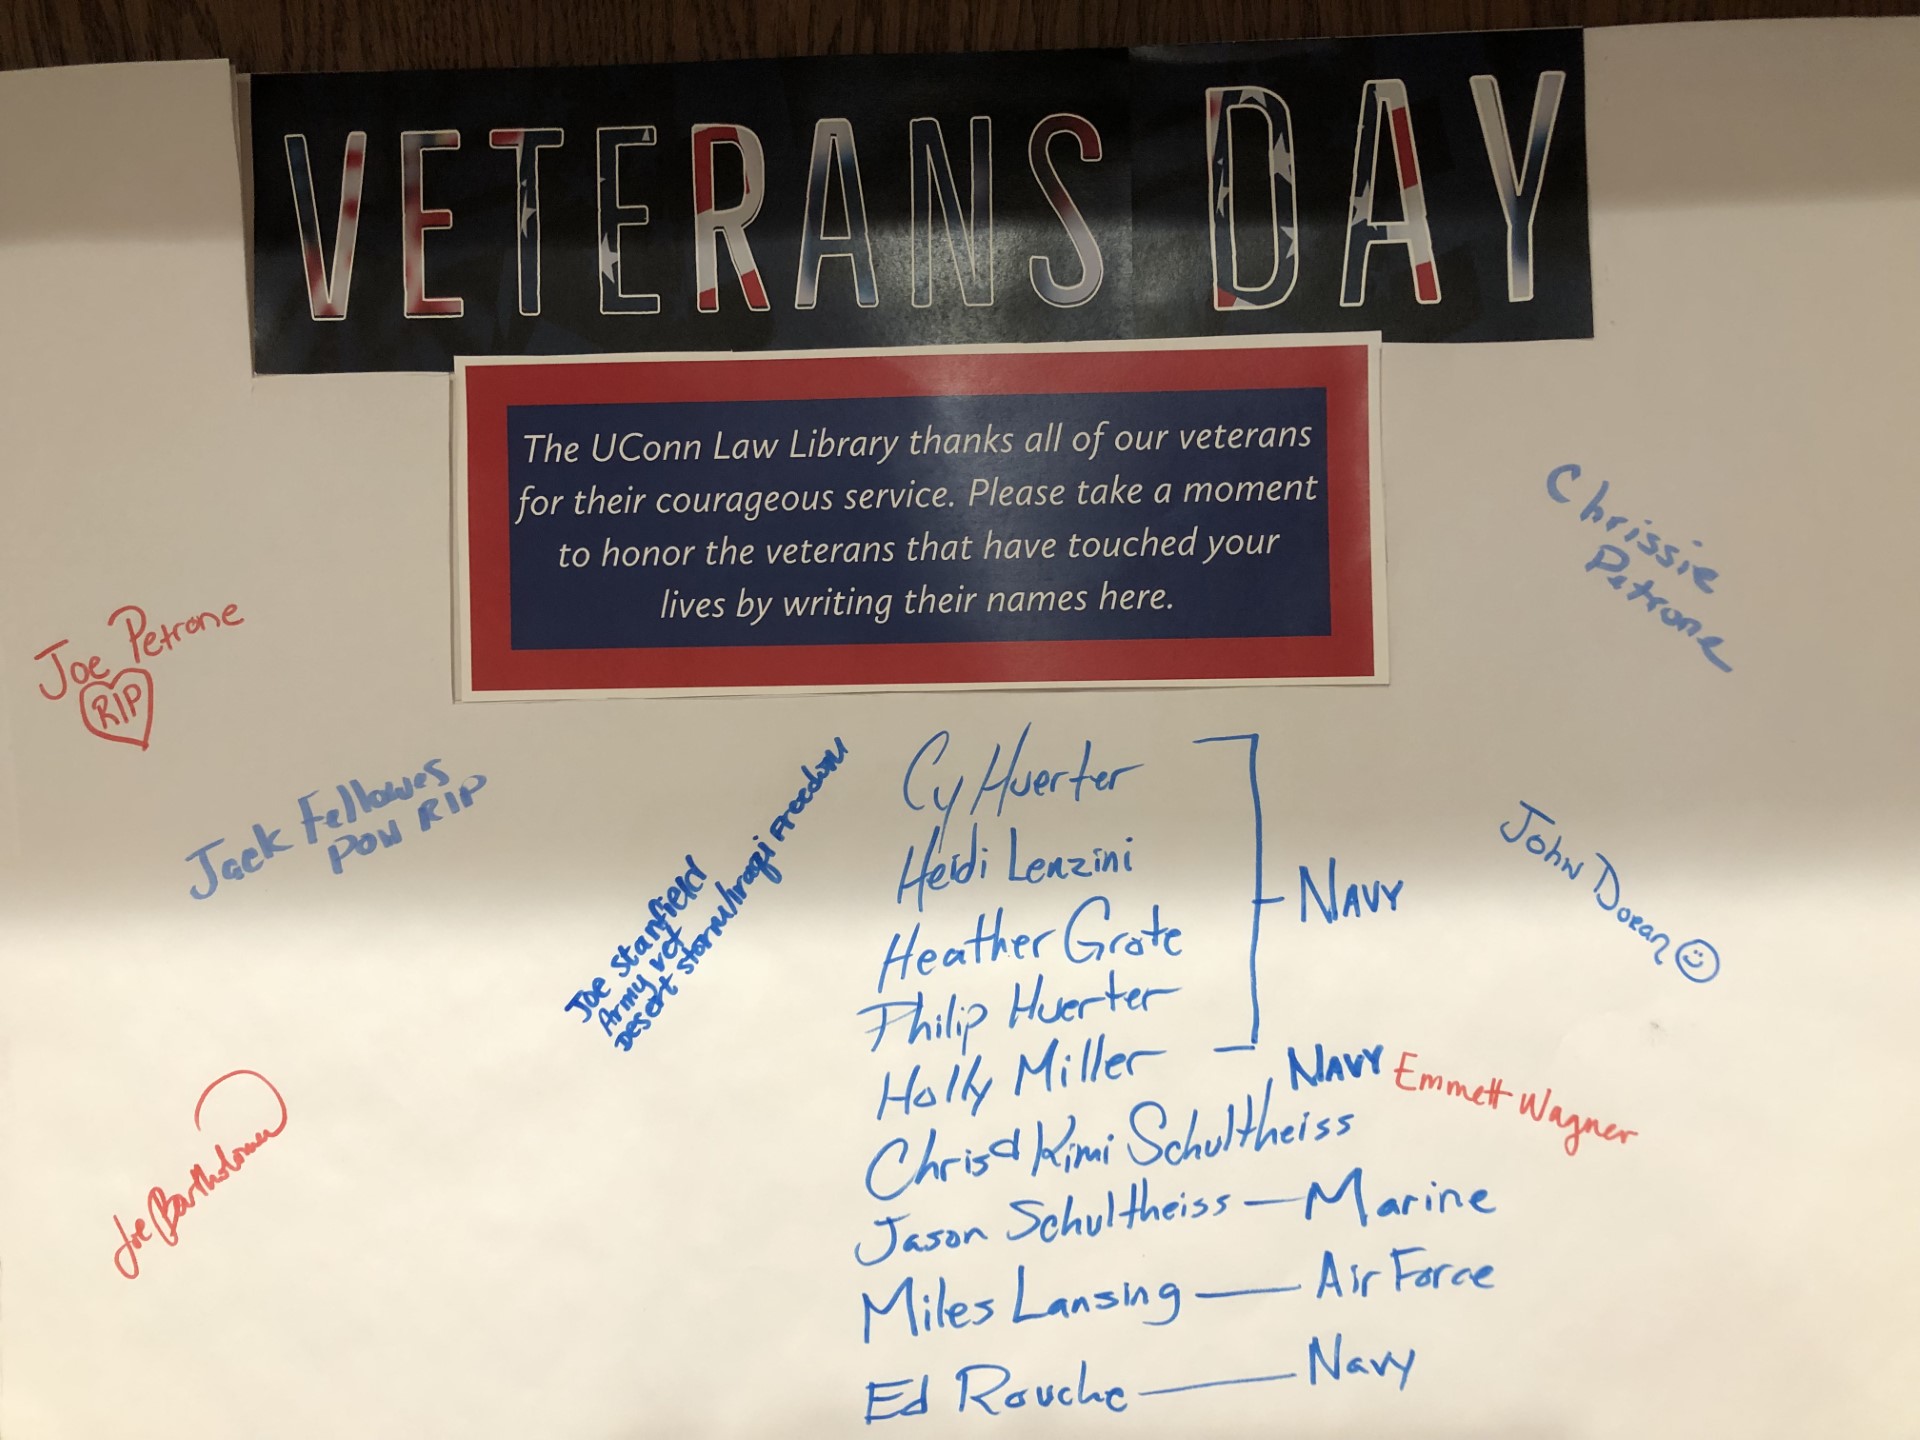 Display honoring Veterans Day with names of individuals written 